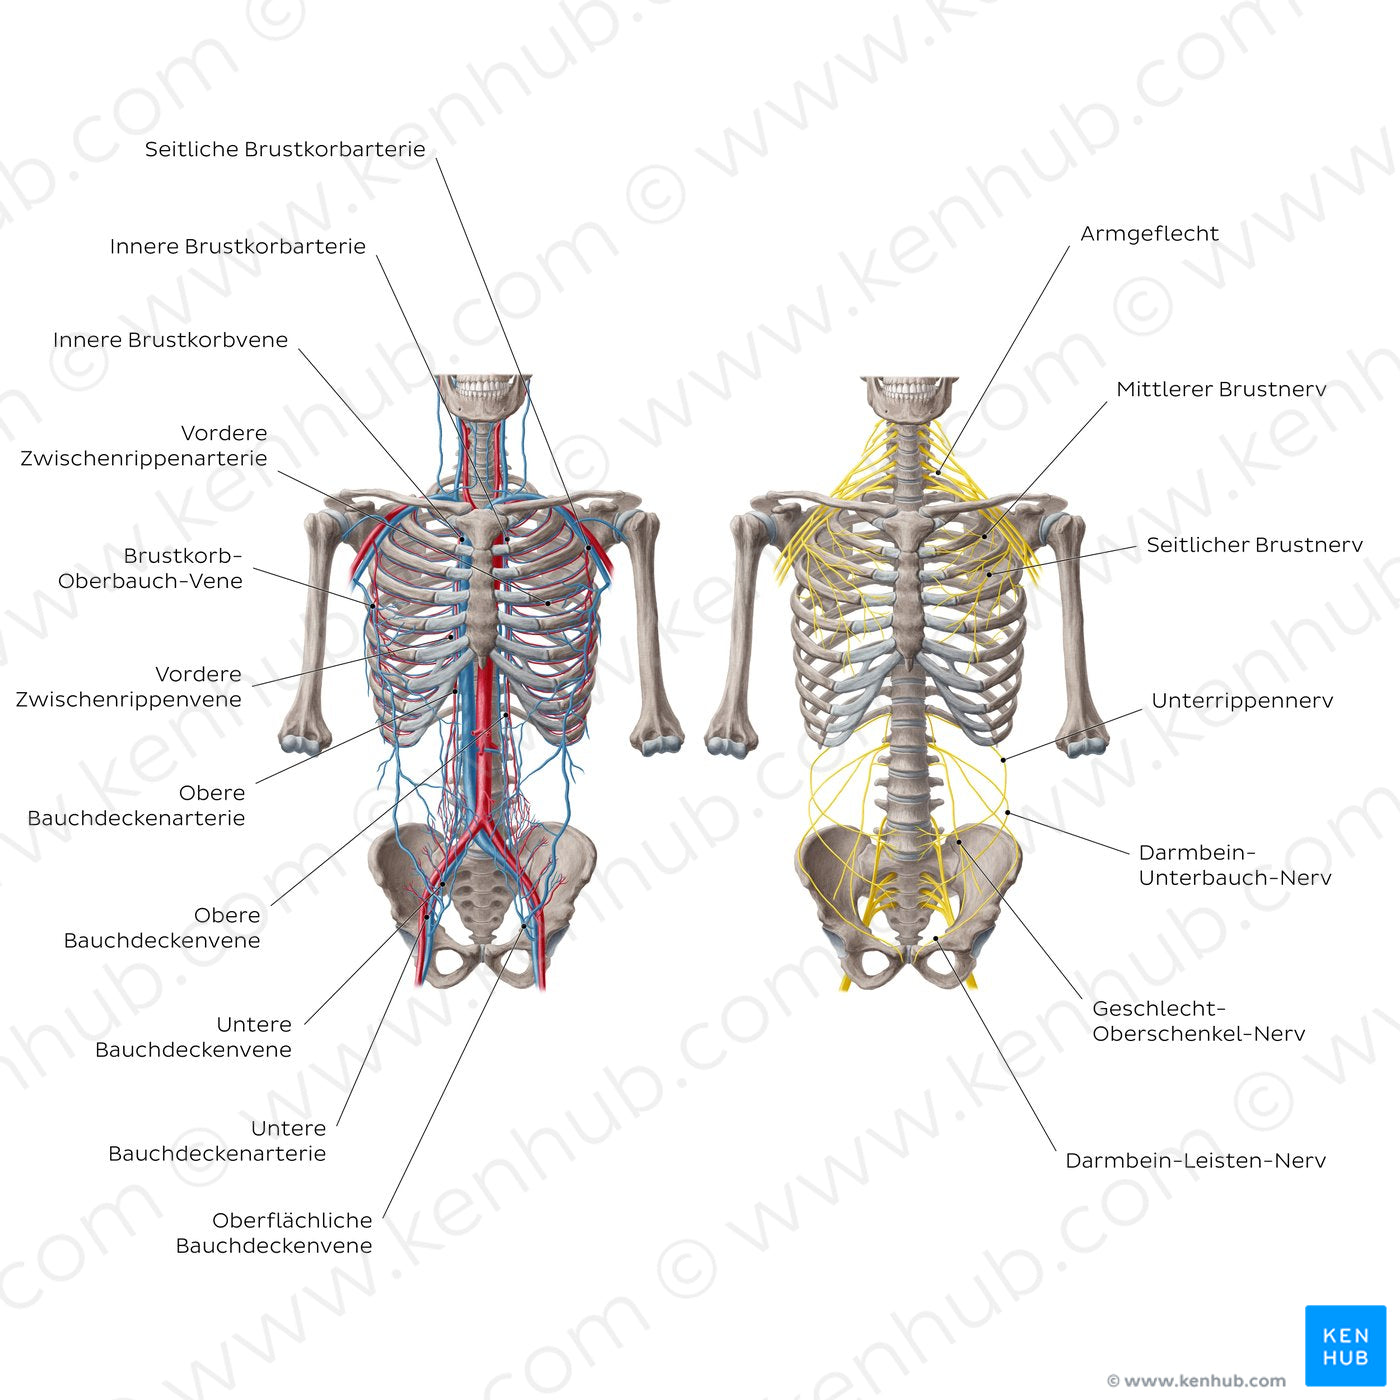 Nerves and vessels of the abdominal wall (German)